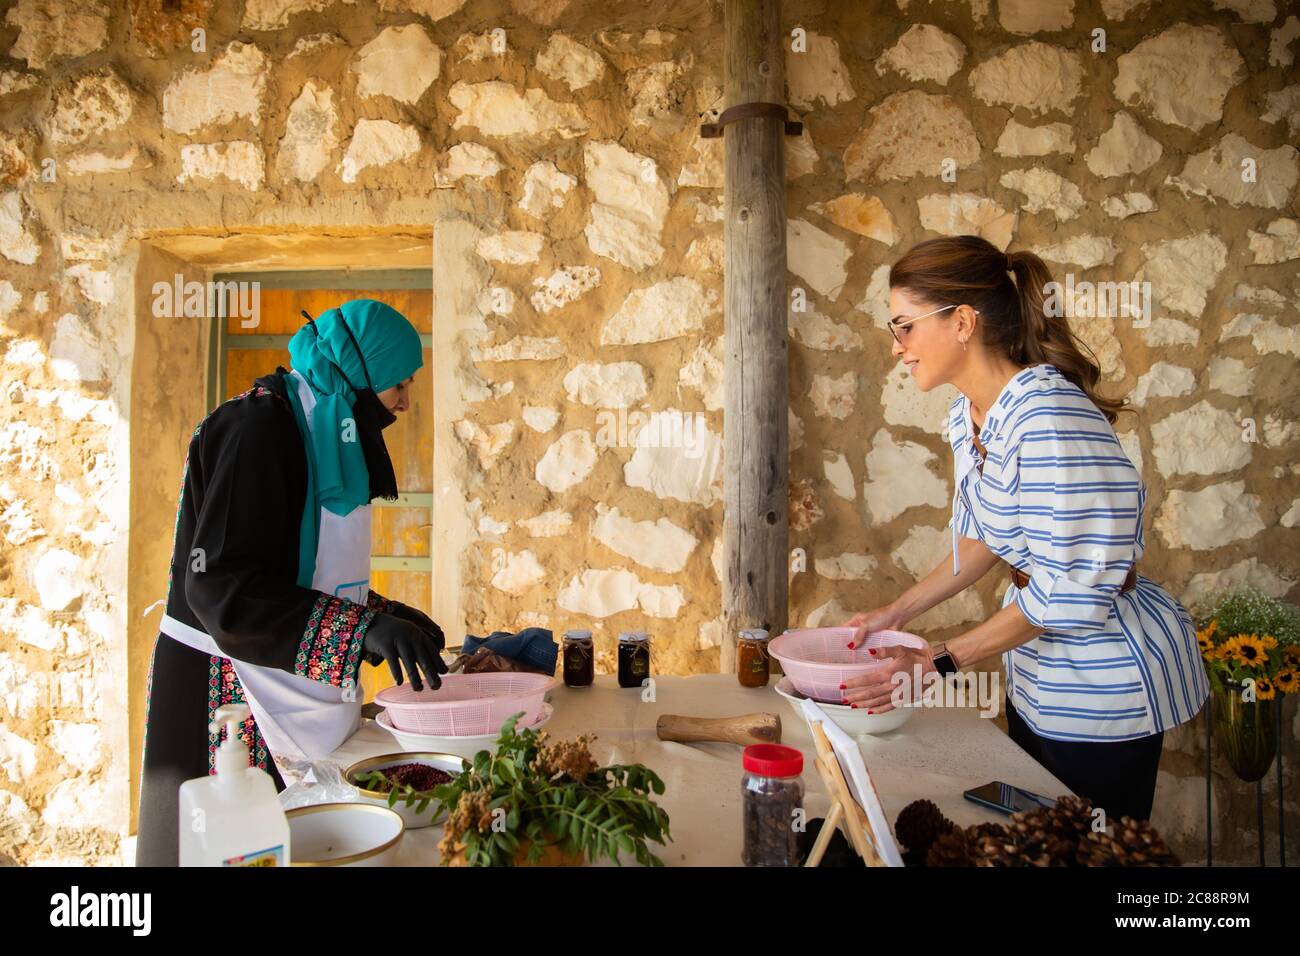 Ajloun, Jordan. 21st July, 2020. Queen Rania of Jordan during a visit to the Ajloun Forest Reserve and Reef Springs Resort, on July 21, 2020 Credit: Royal Hashemite Court/Albert Nieboer/ Netherlands OUT/Point de Vue OUT |/dpa/Alamy Live News Stock Photo